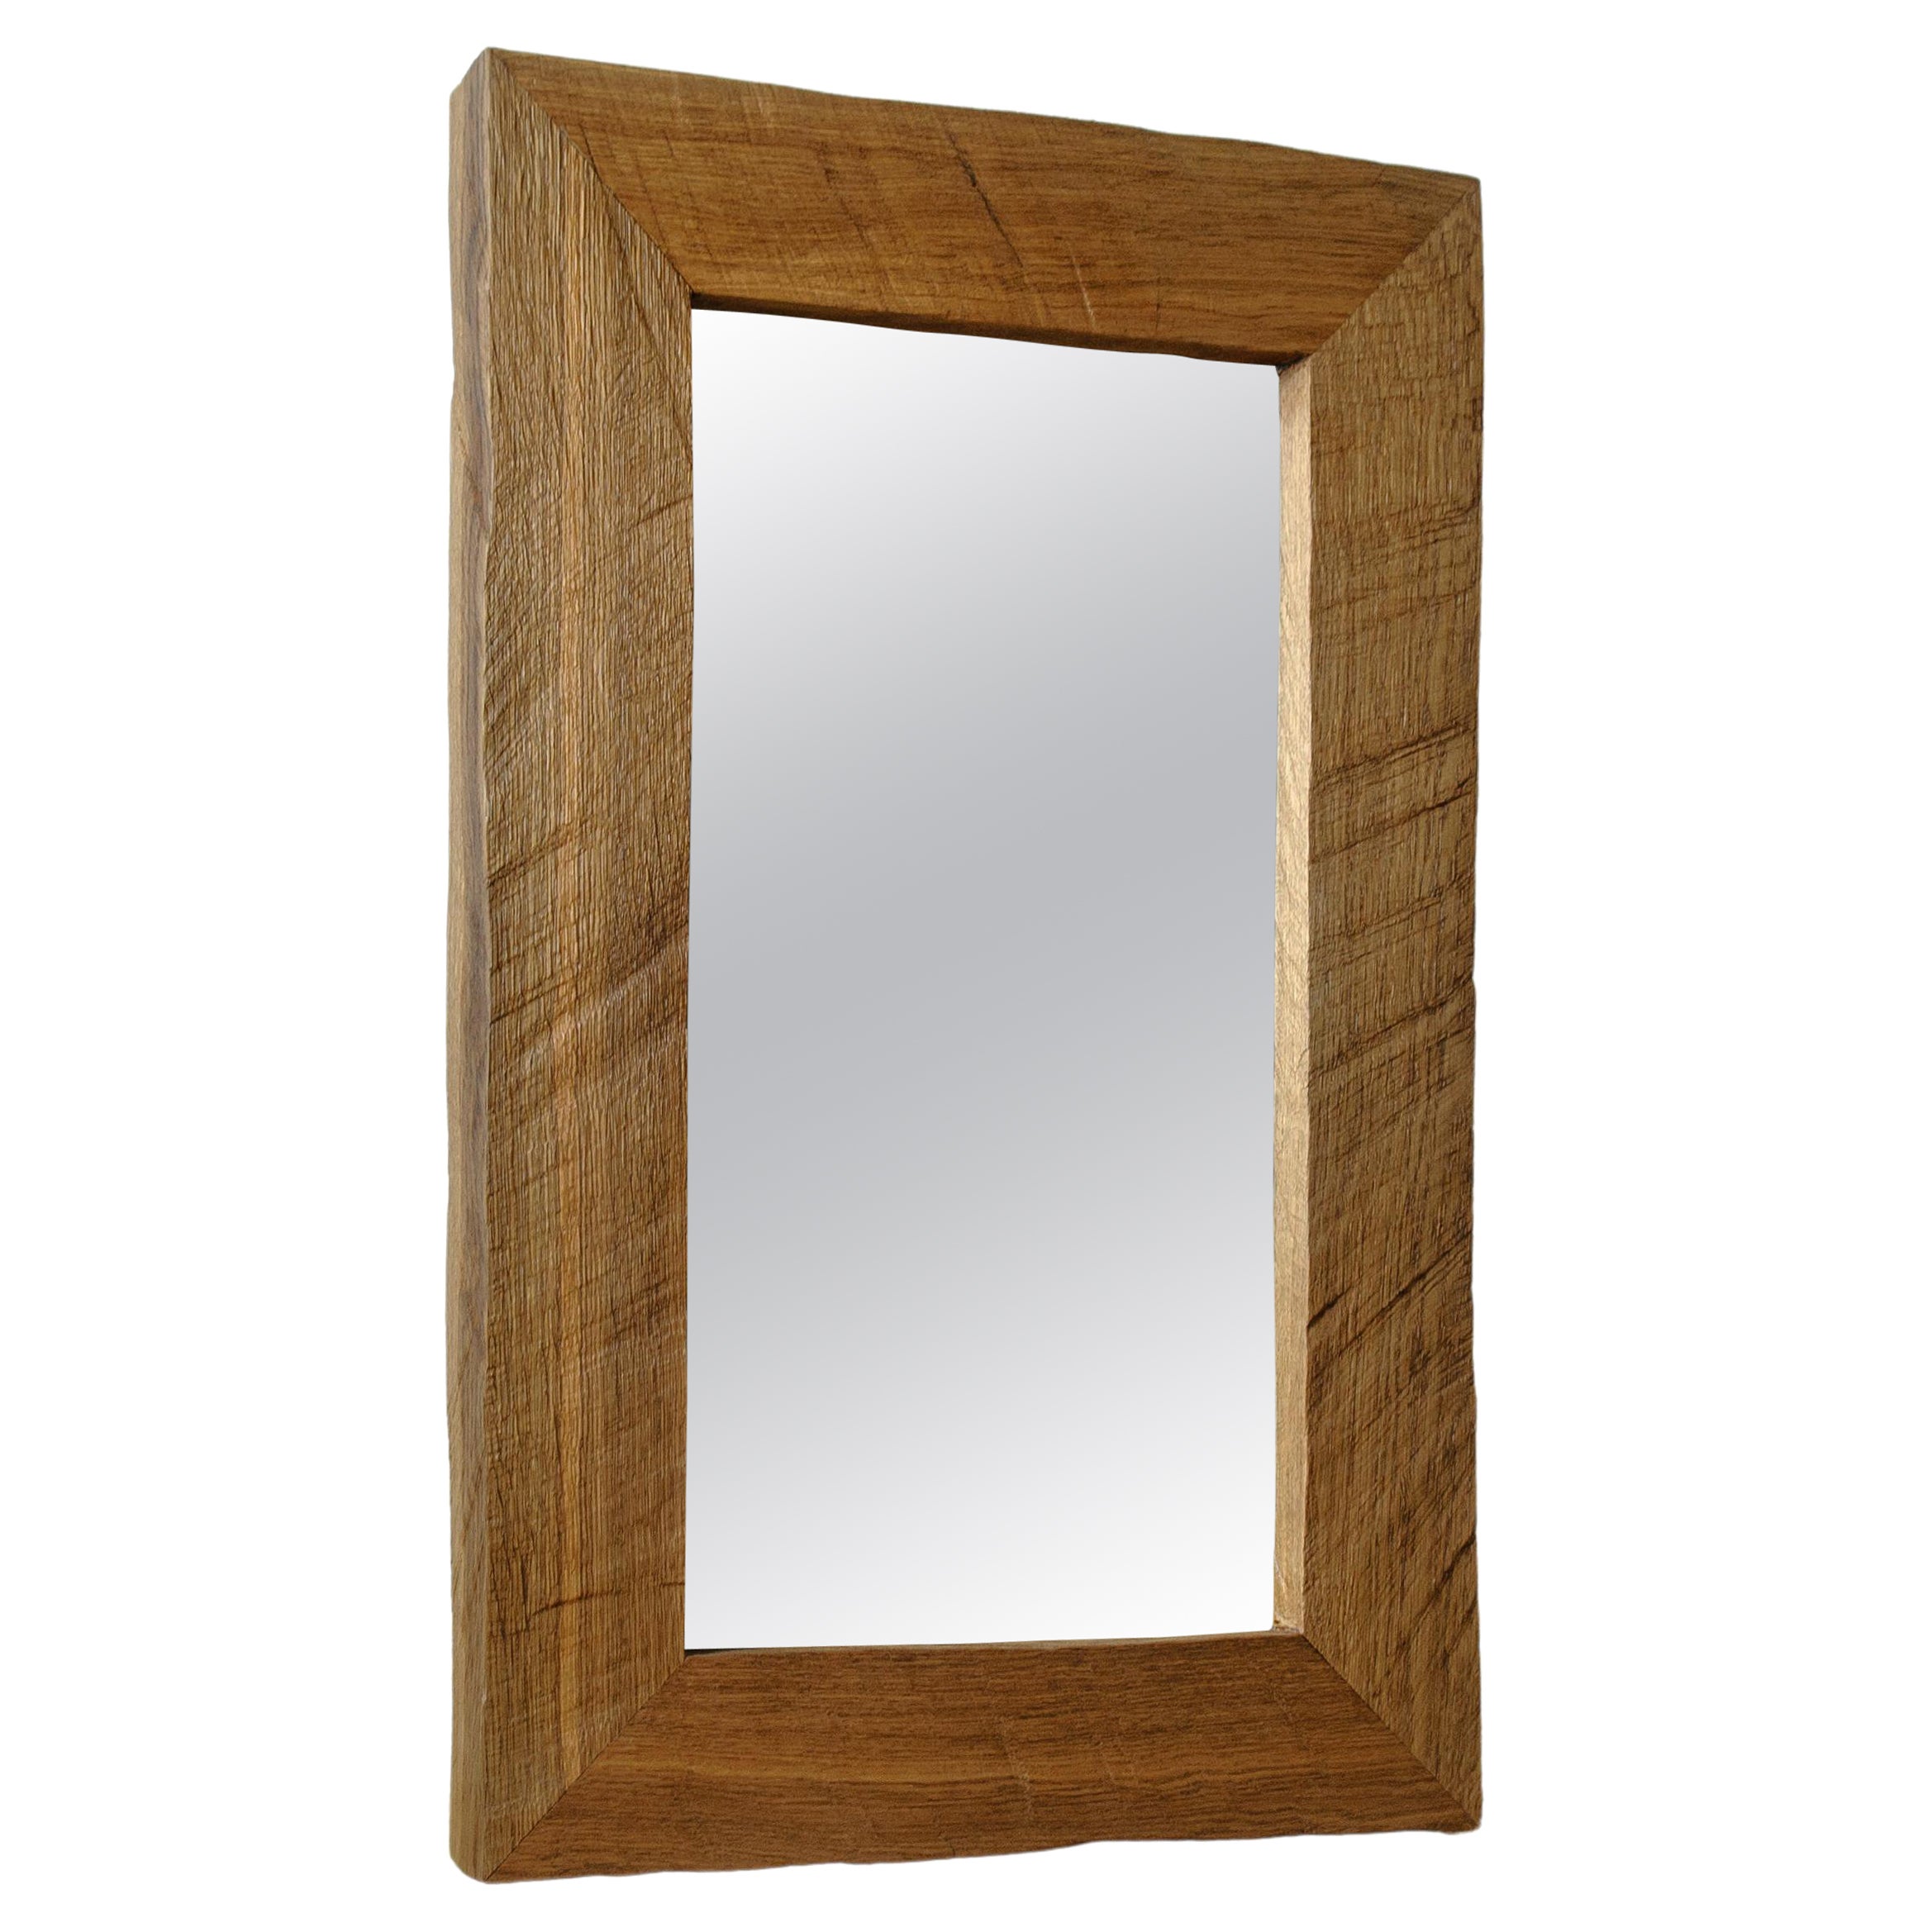 Contemporary Brutalist Style Wall Mirror in Solid Oak v2